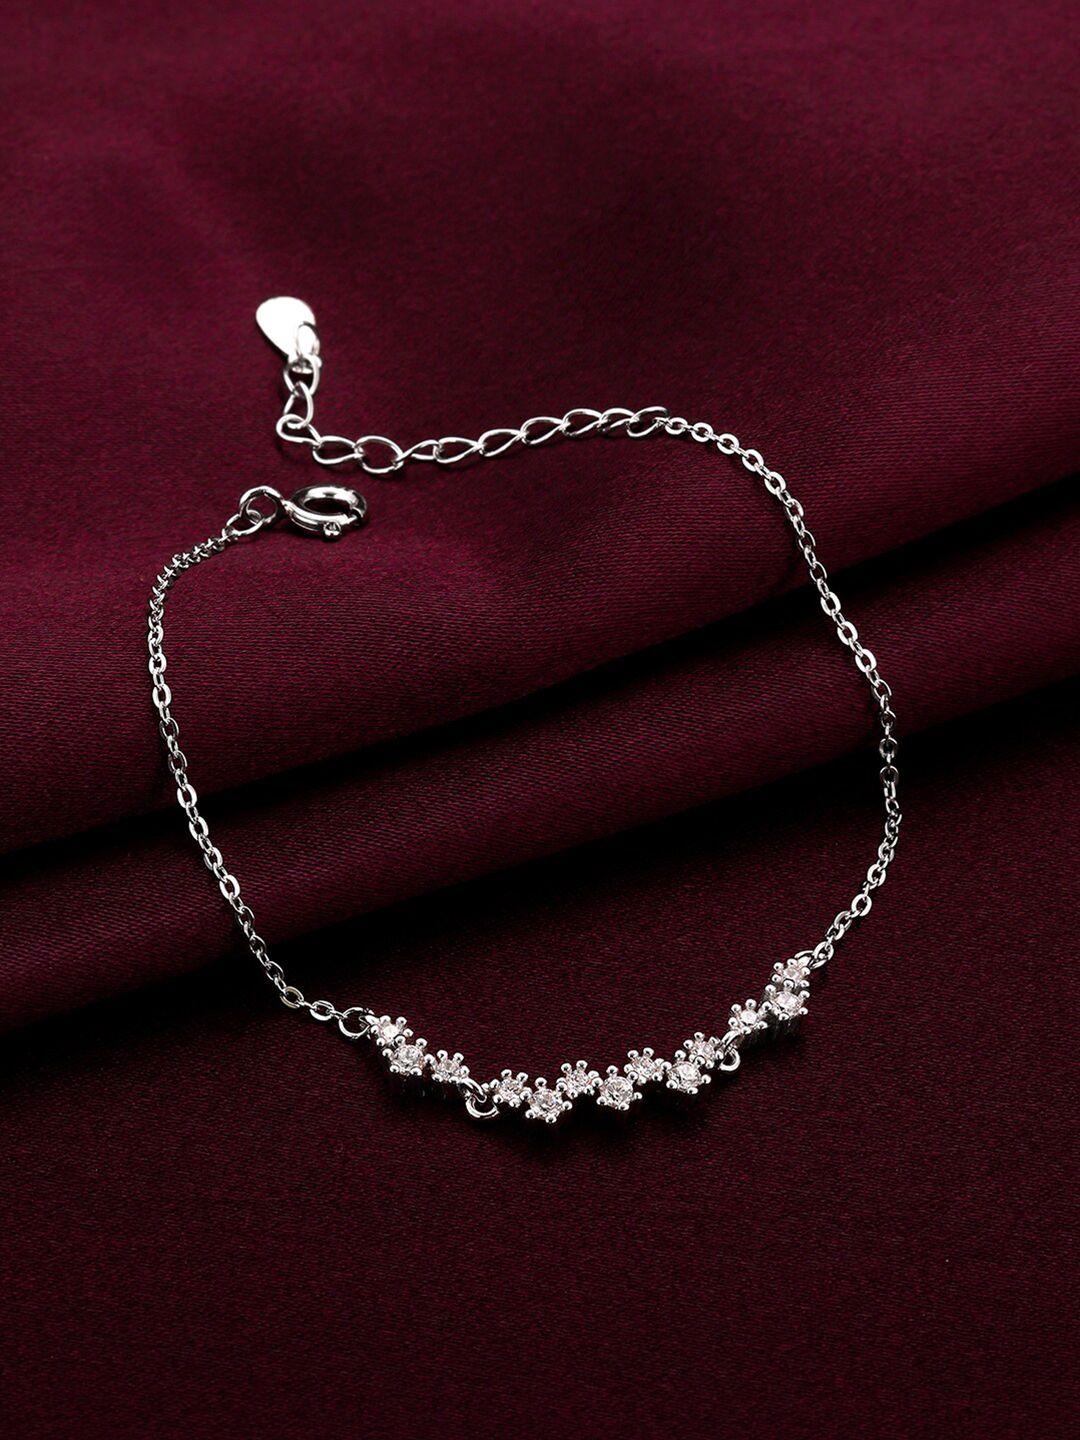 giva rhodium-plated 925 sterling silver cubic zirconia link bracelet